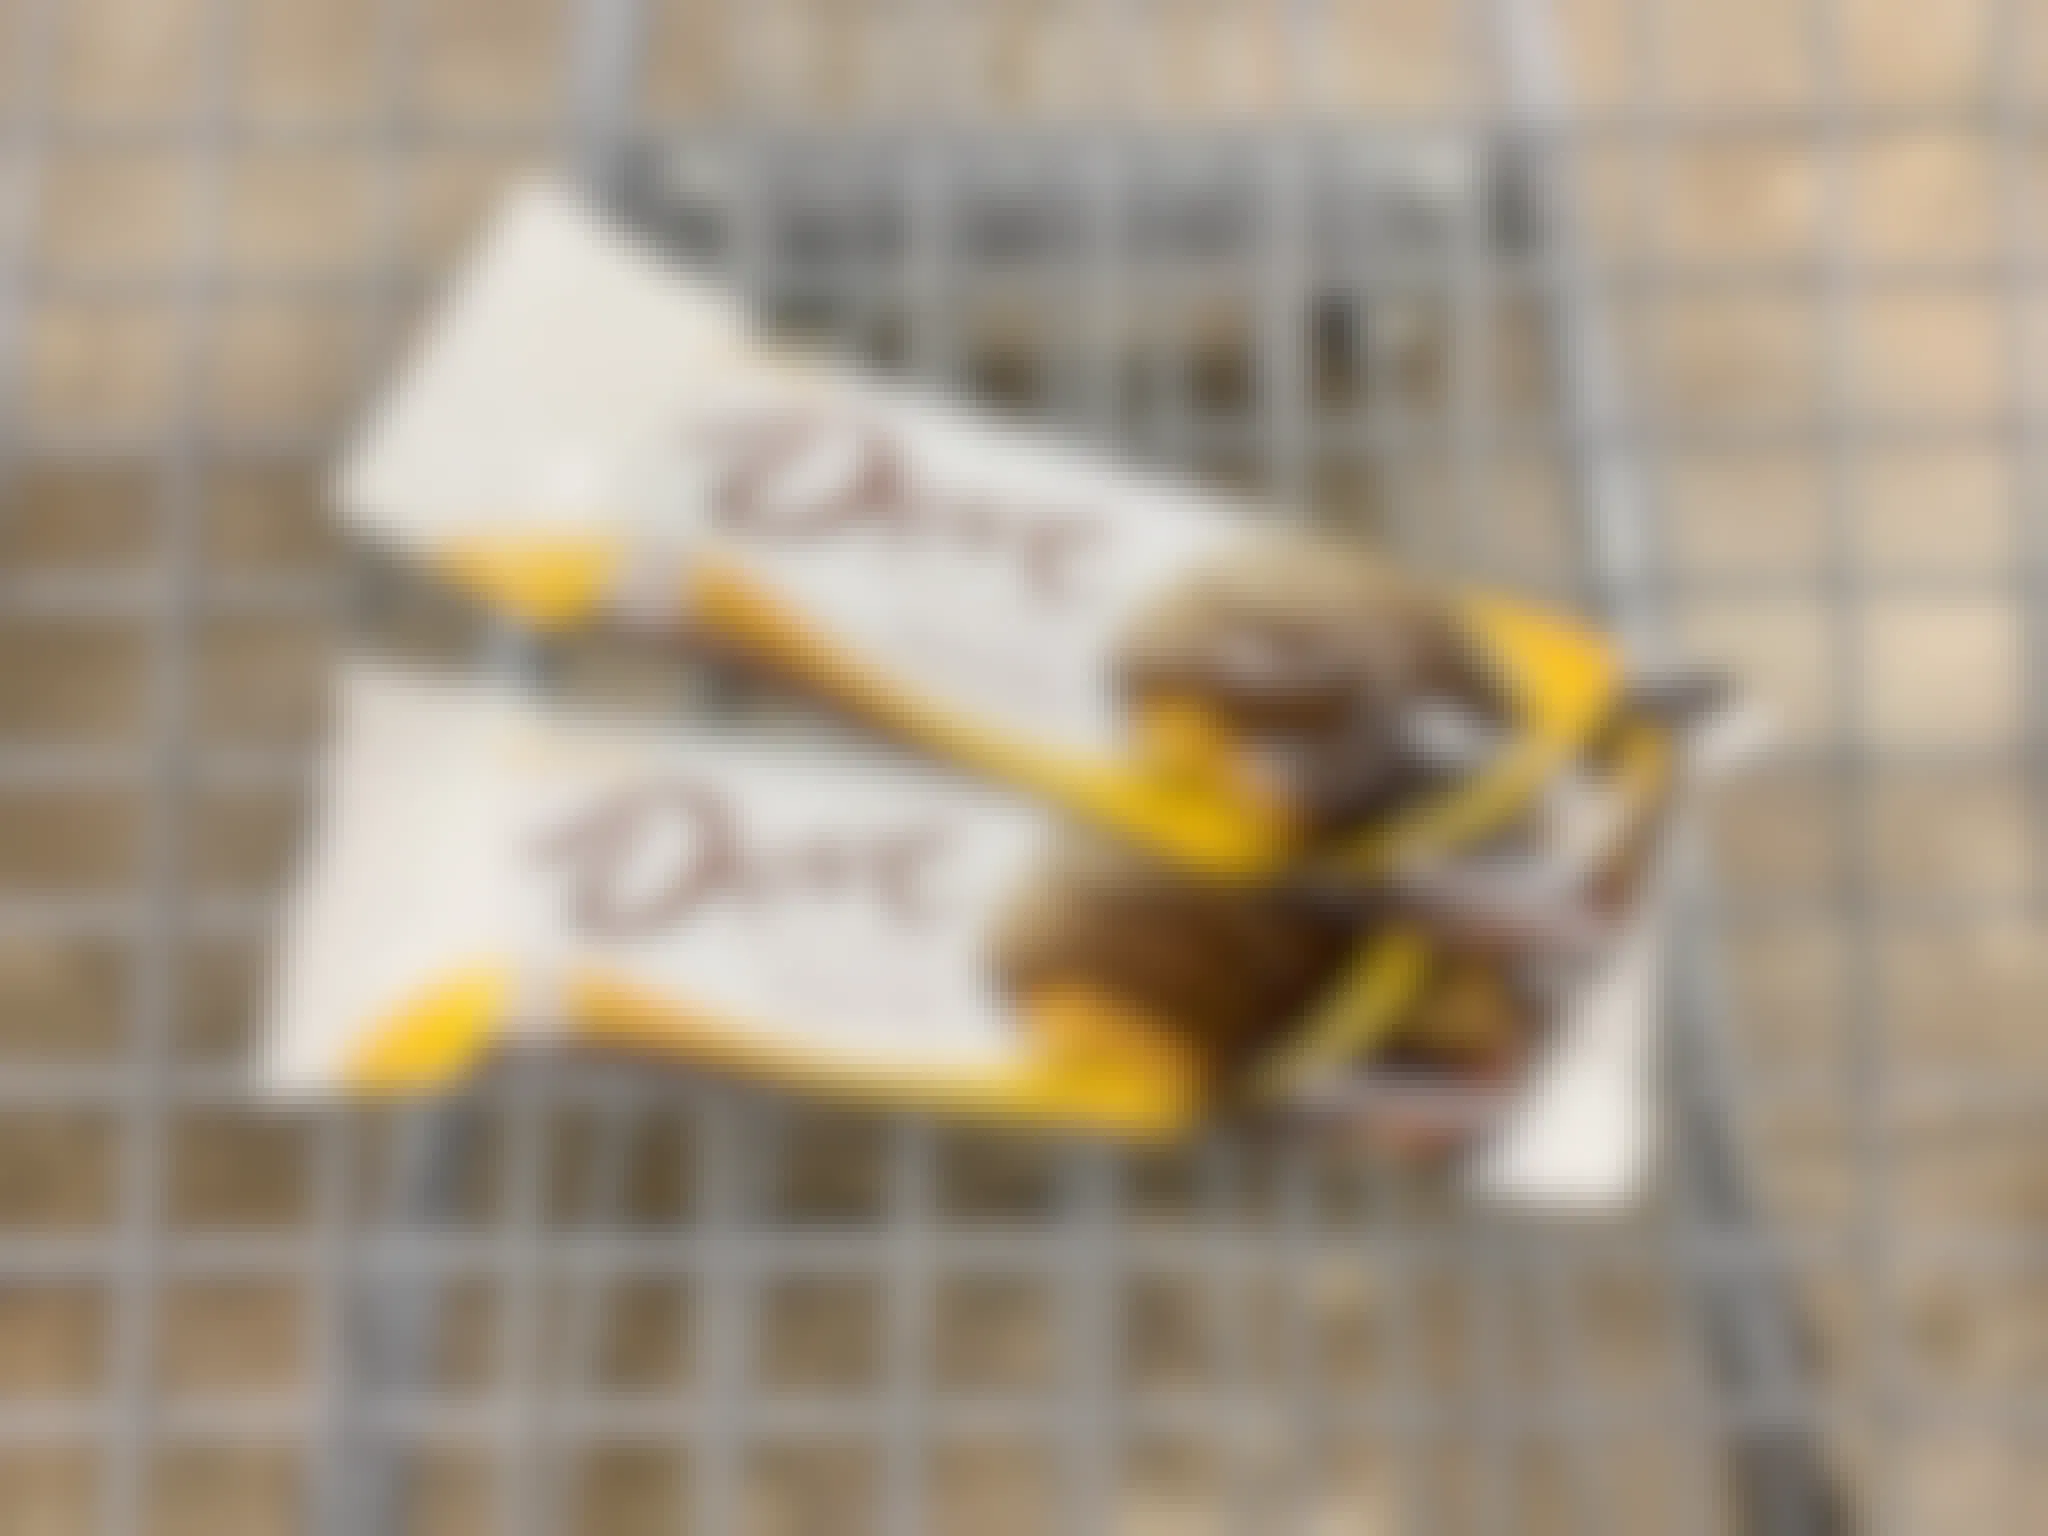 dove chocolate and peanut butter promises in walmart cart